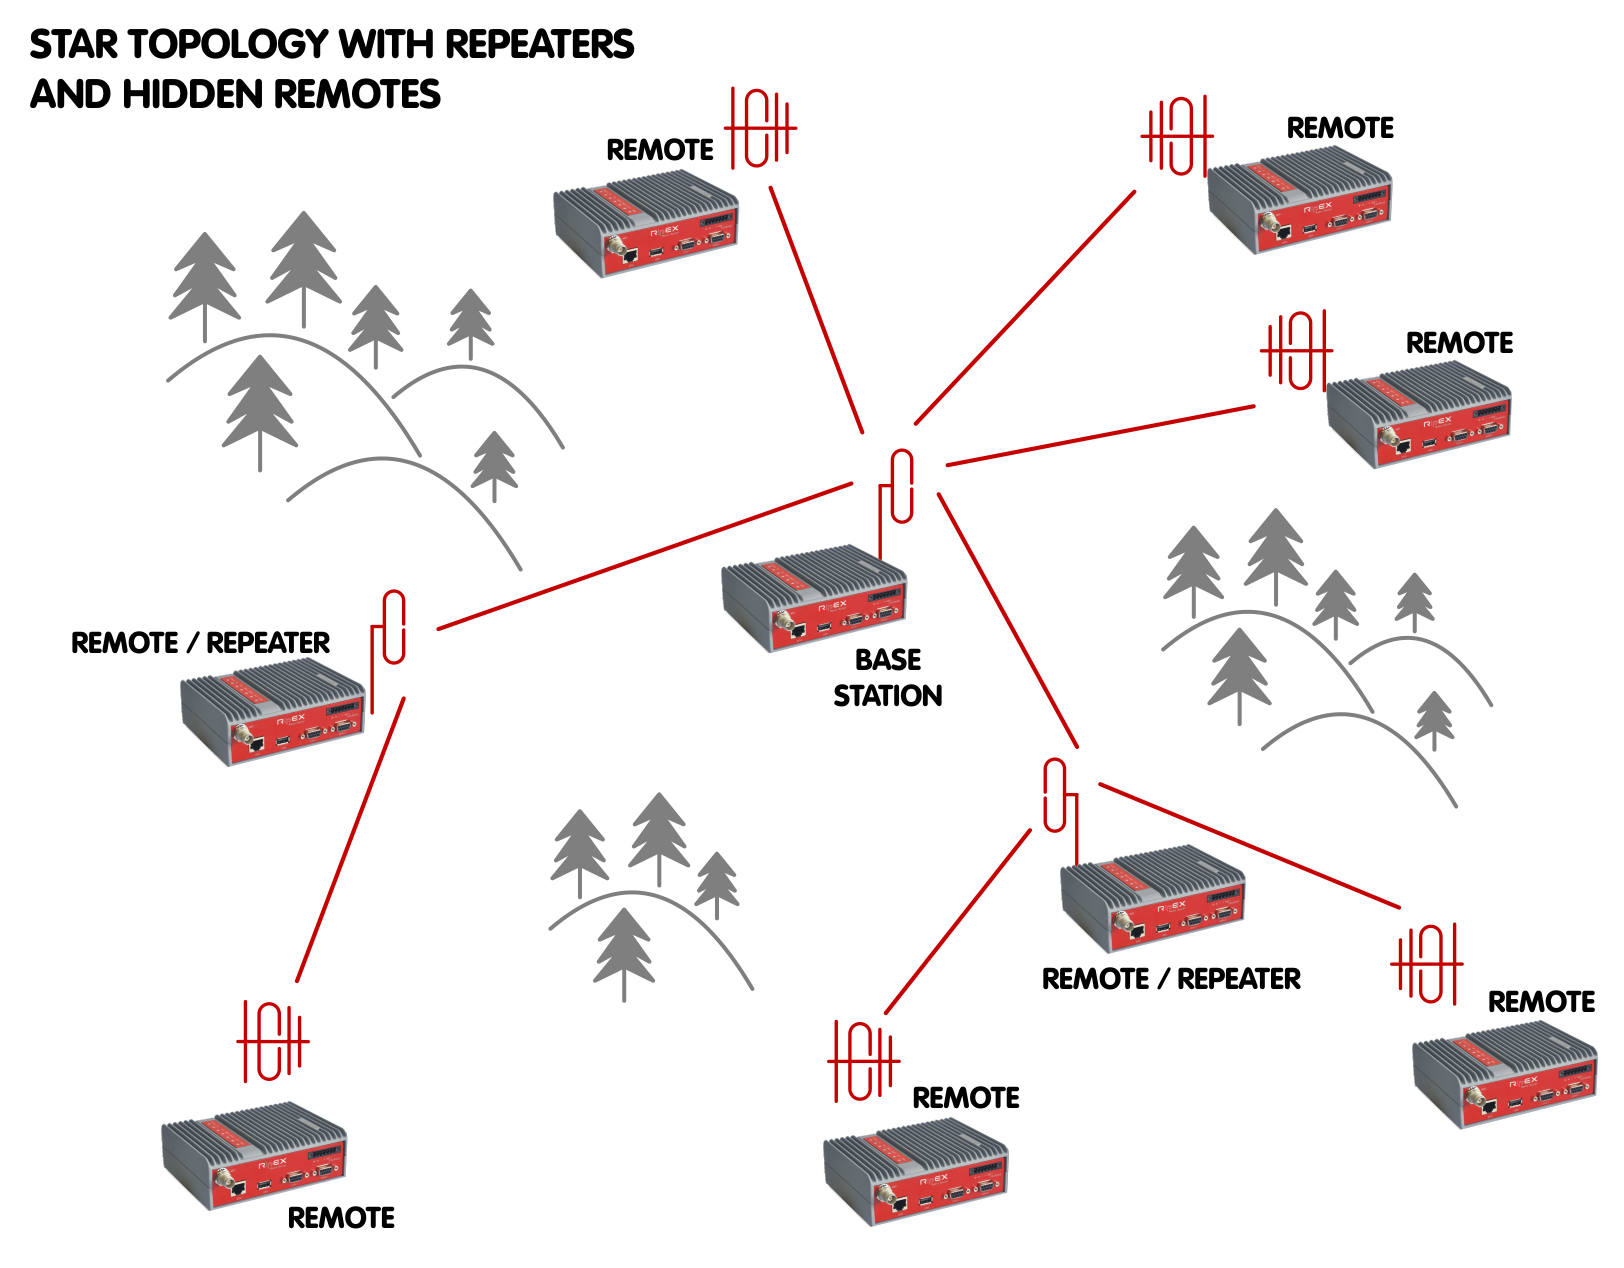 Star topology with repeaters and hidden remotes